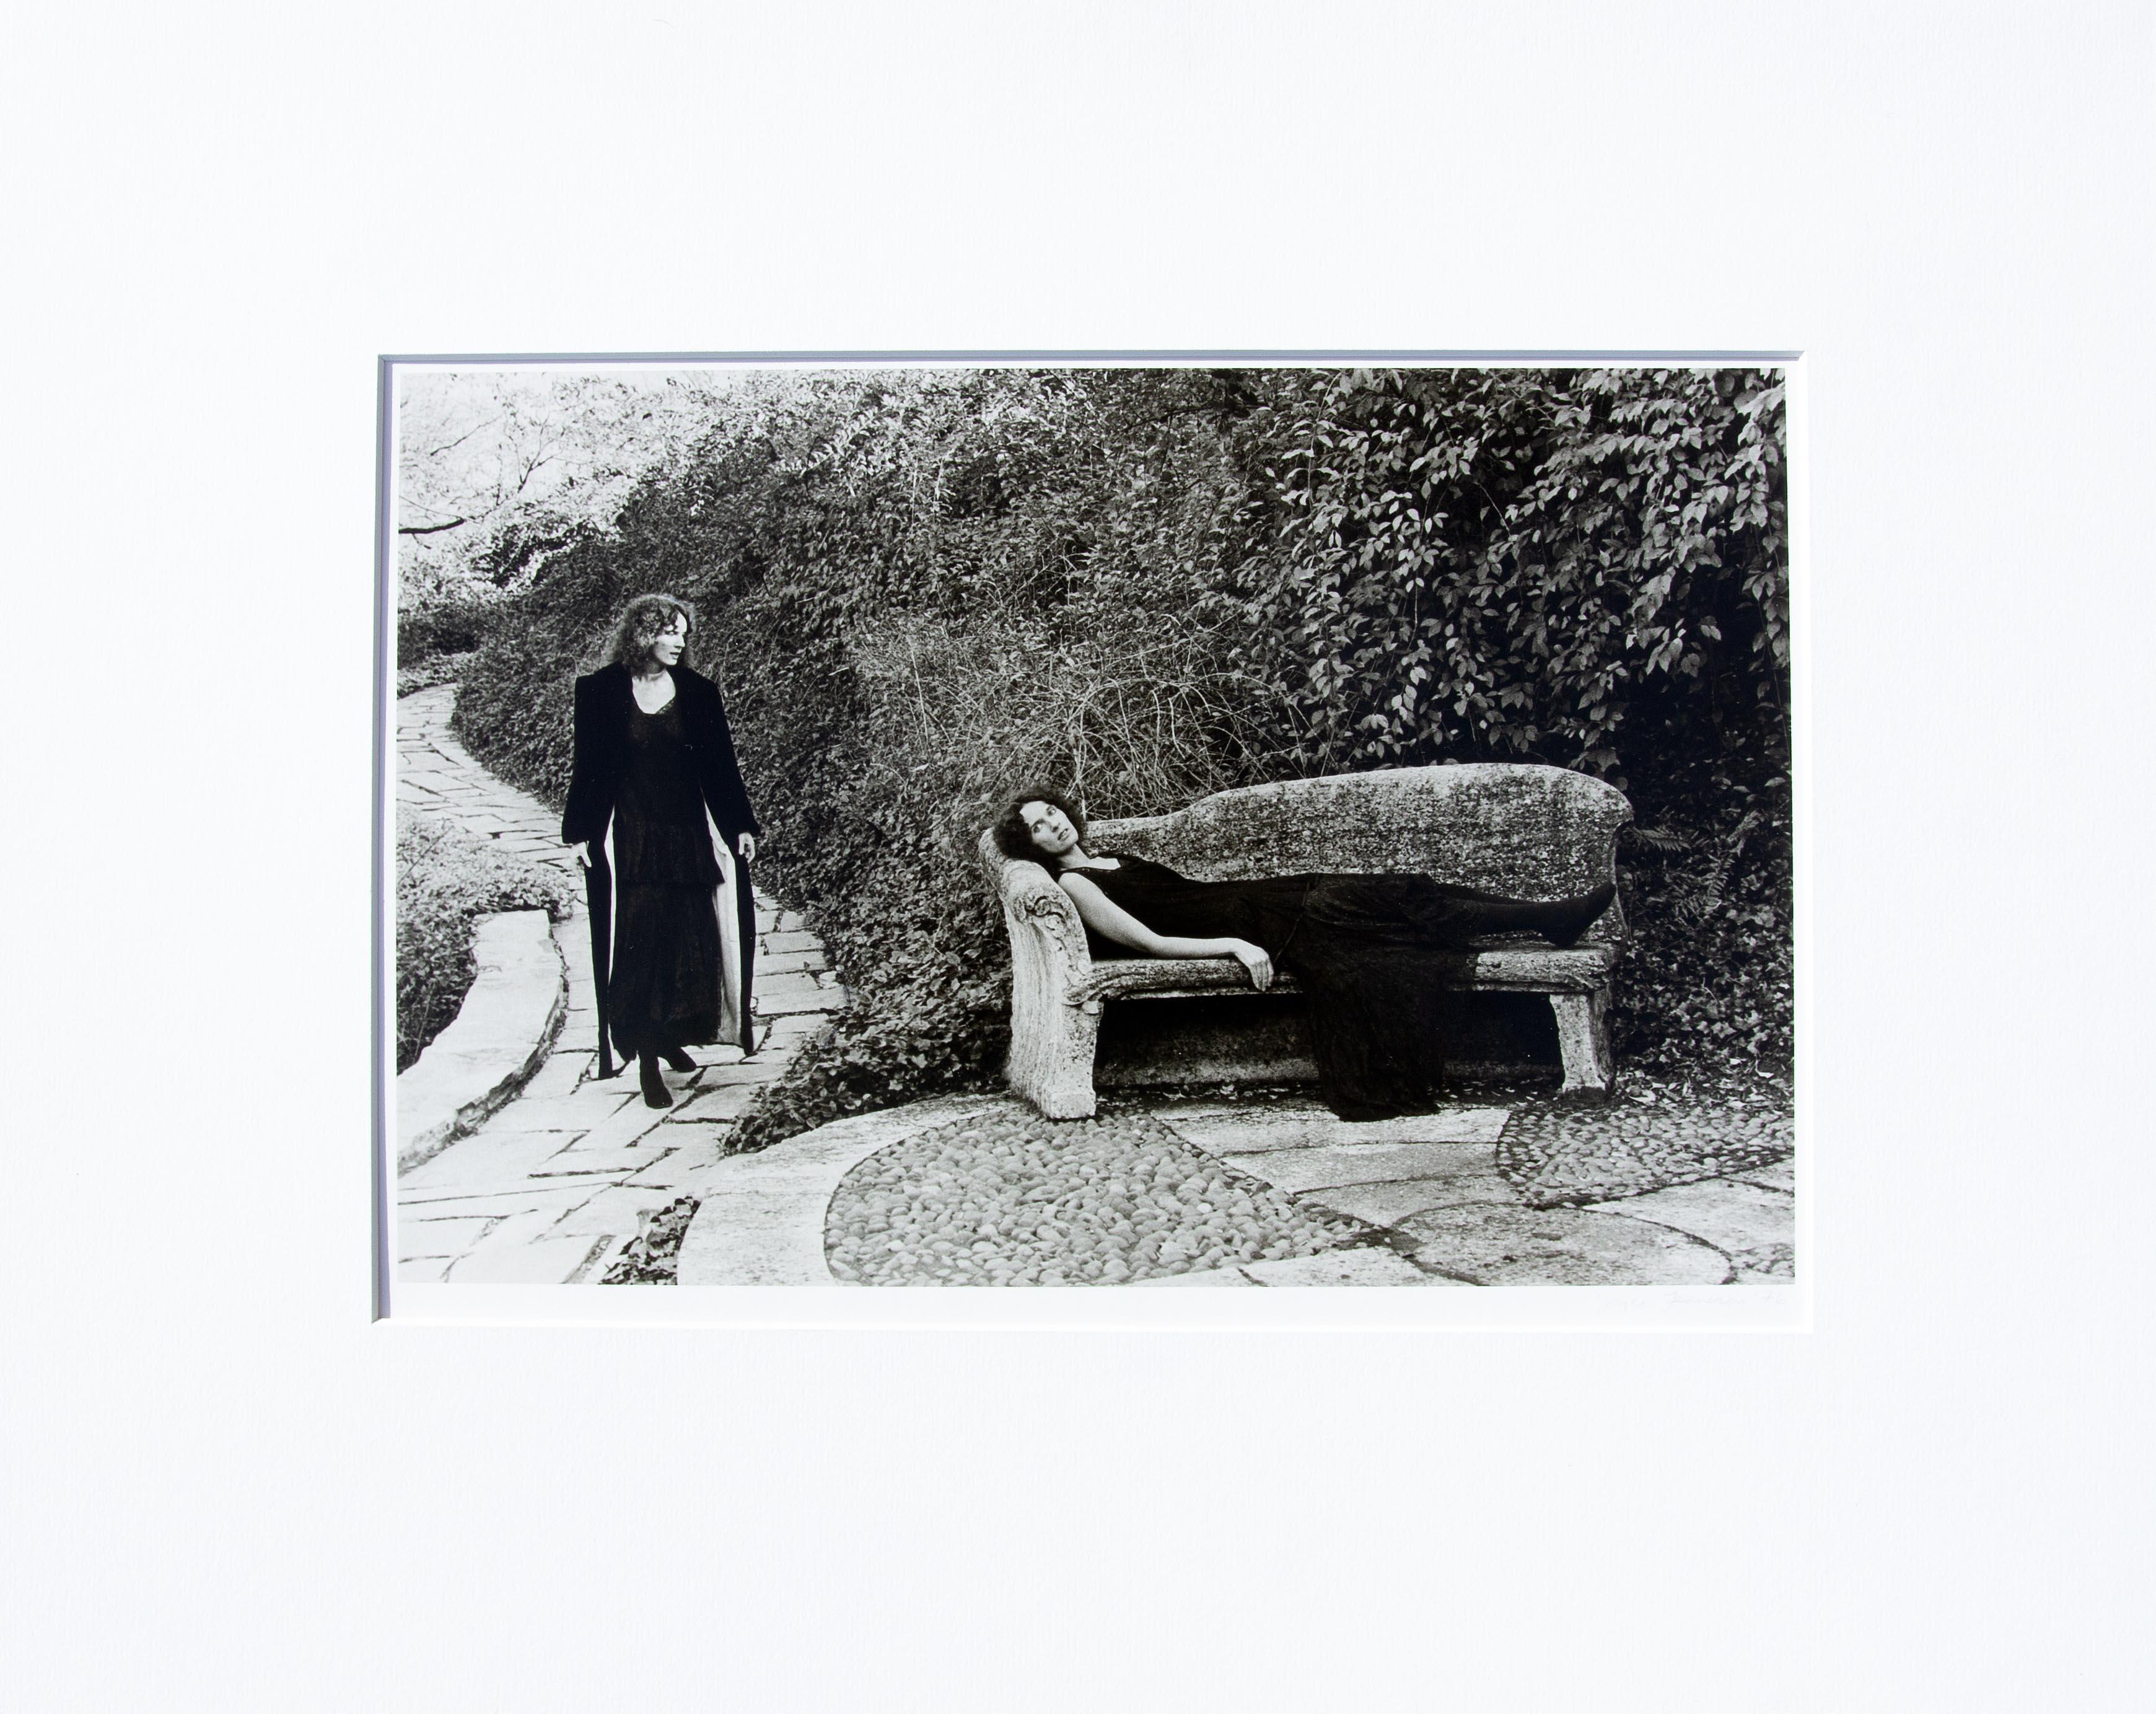 Joyce Tenneson self-portrait. Cover image for Tenneson's book 'In/Sights: Self-Portraits by Women. Silver gelatin photograph. Signed and dated 1976. Matted. Unframed. Matted size 16